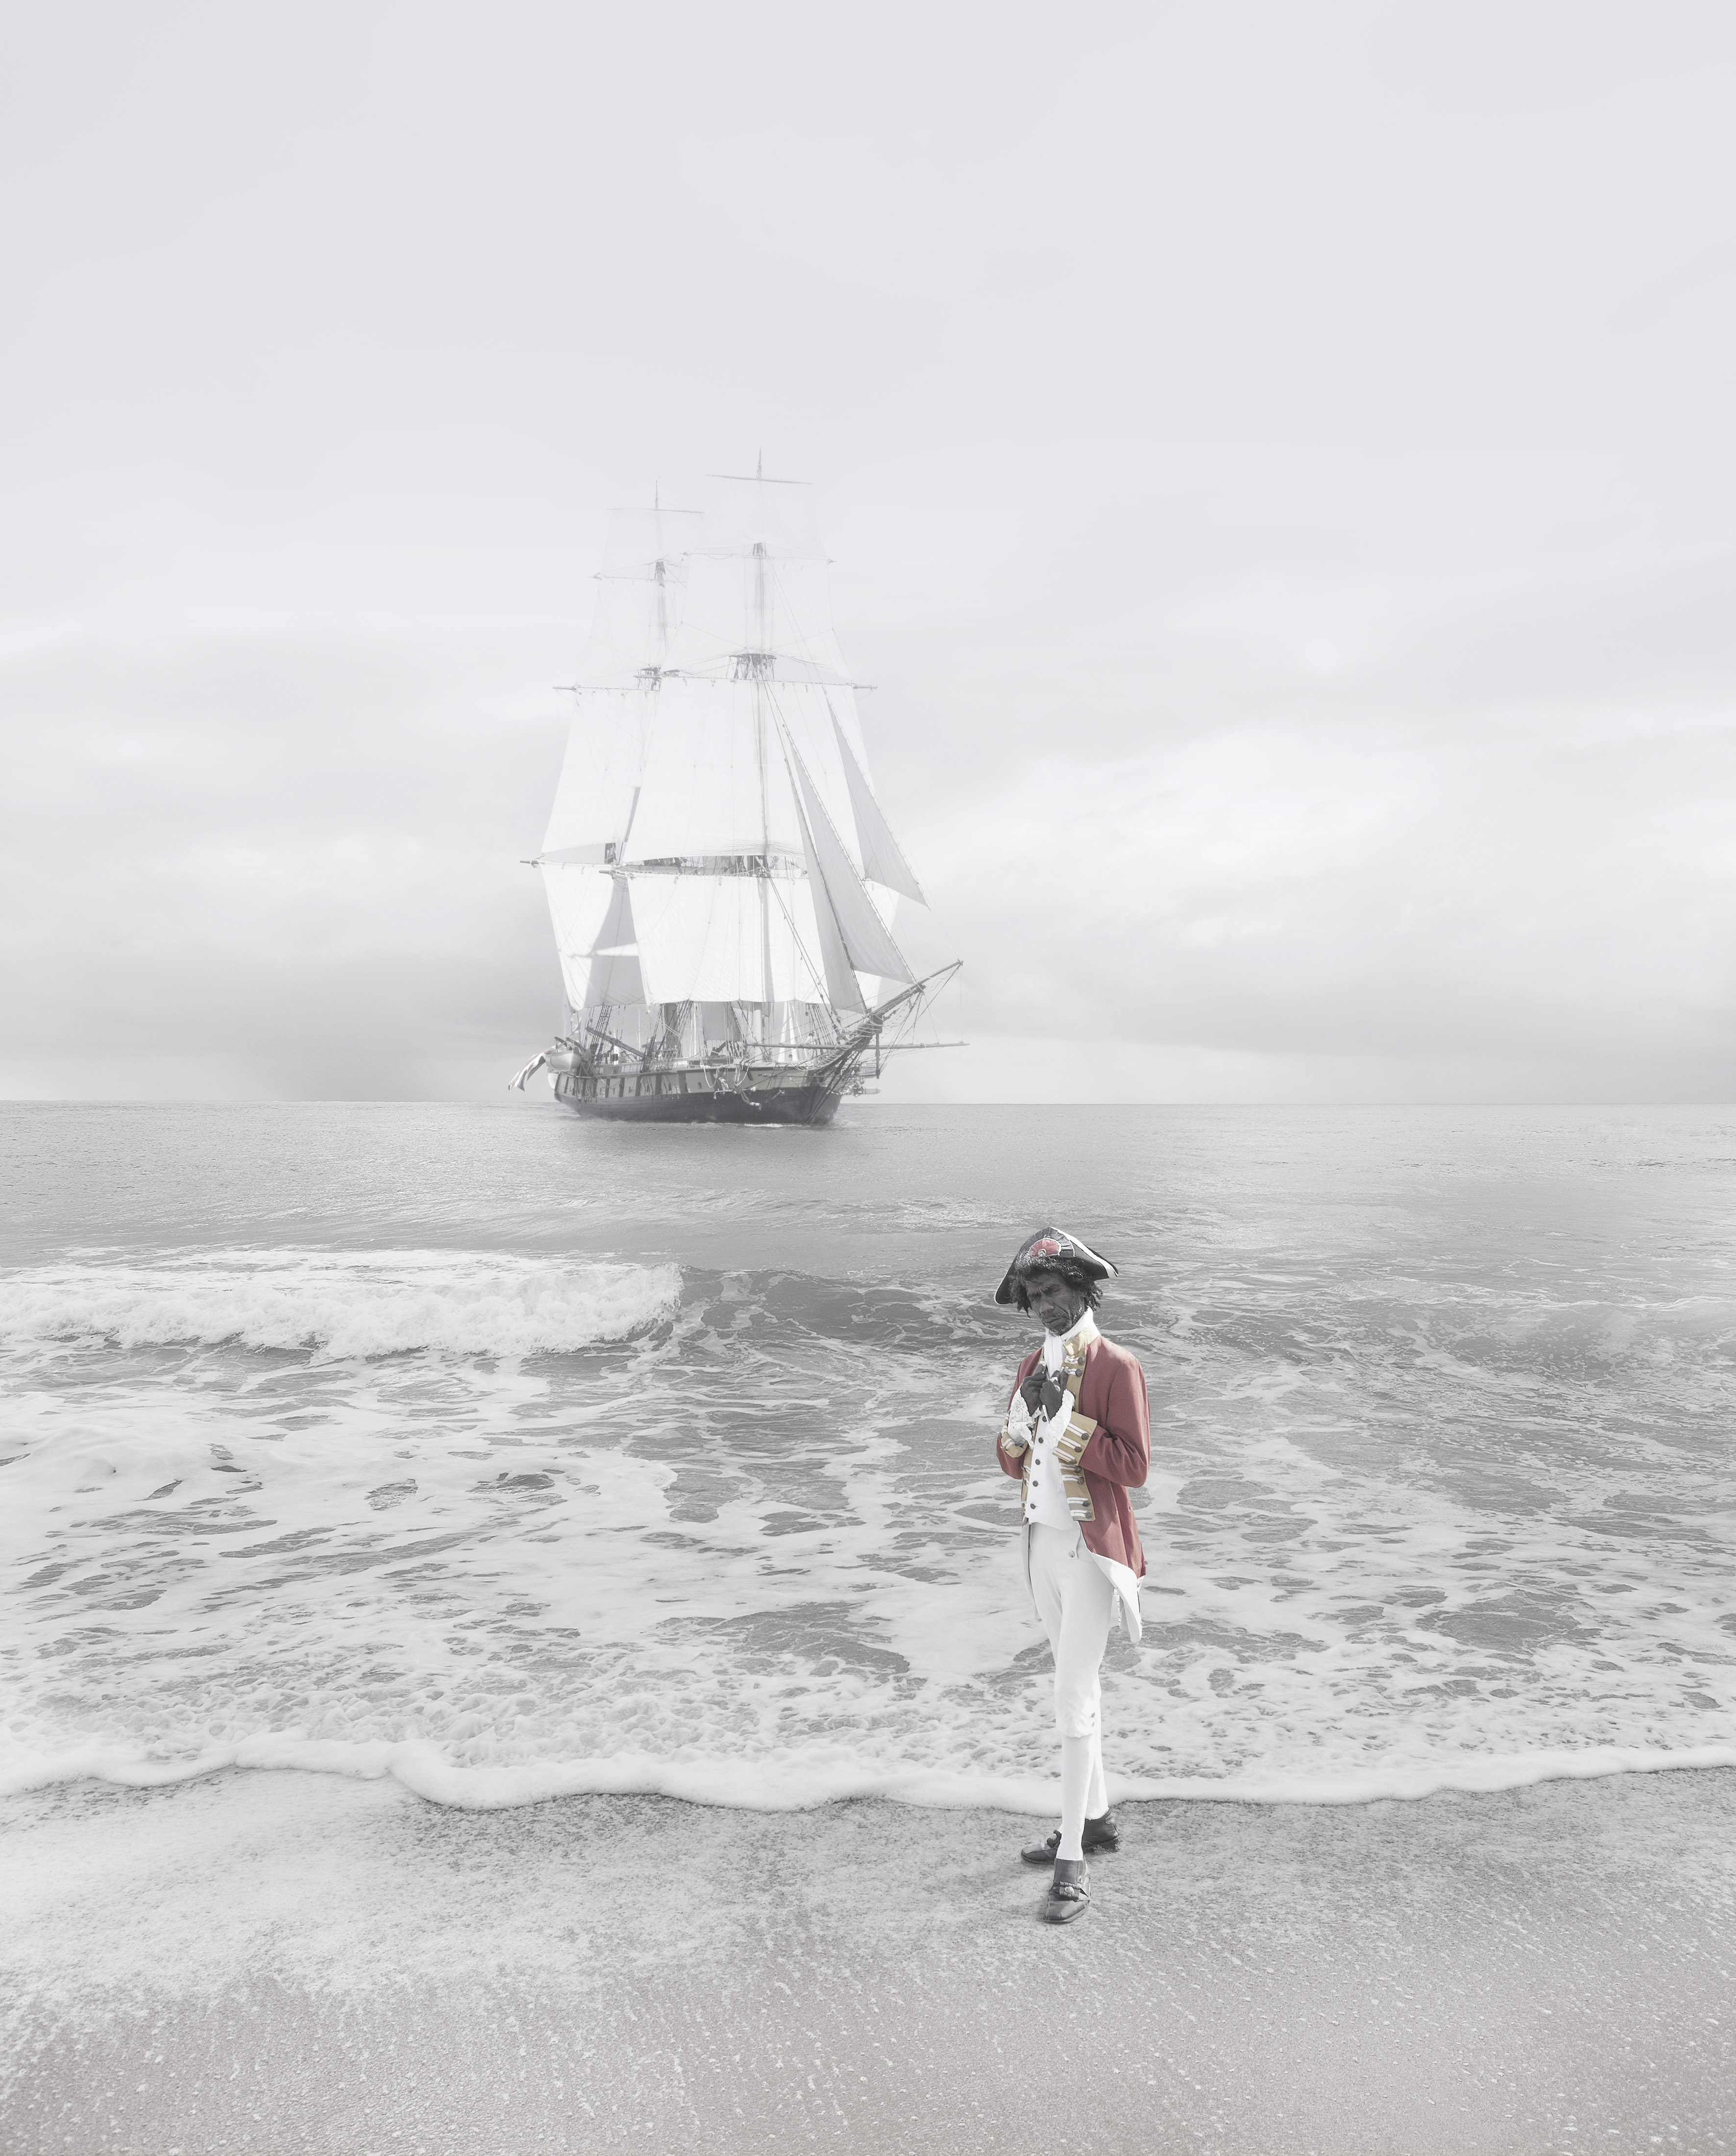 Composite image of an Aboriginal man in British naval dress on the beach, and a sailing ship in the ocean in the background.